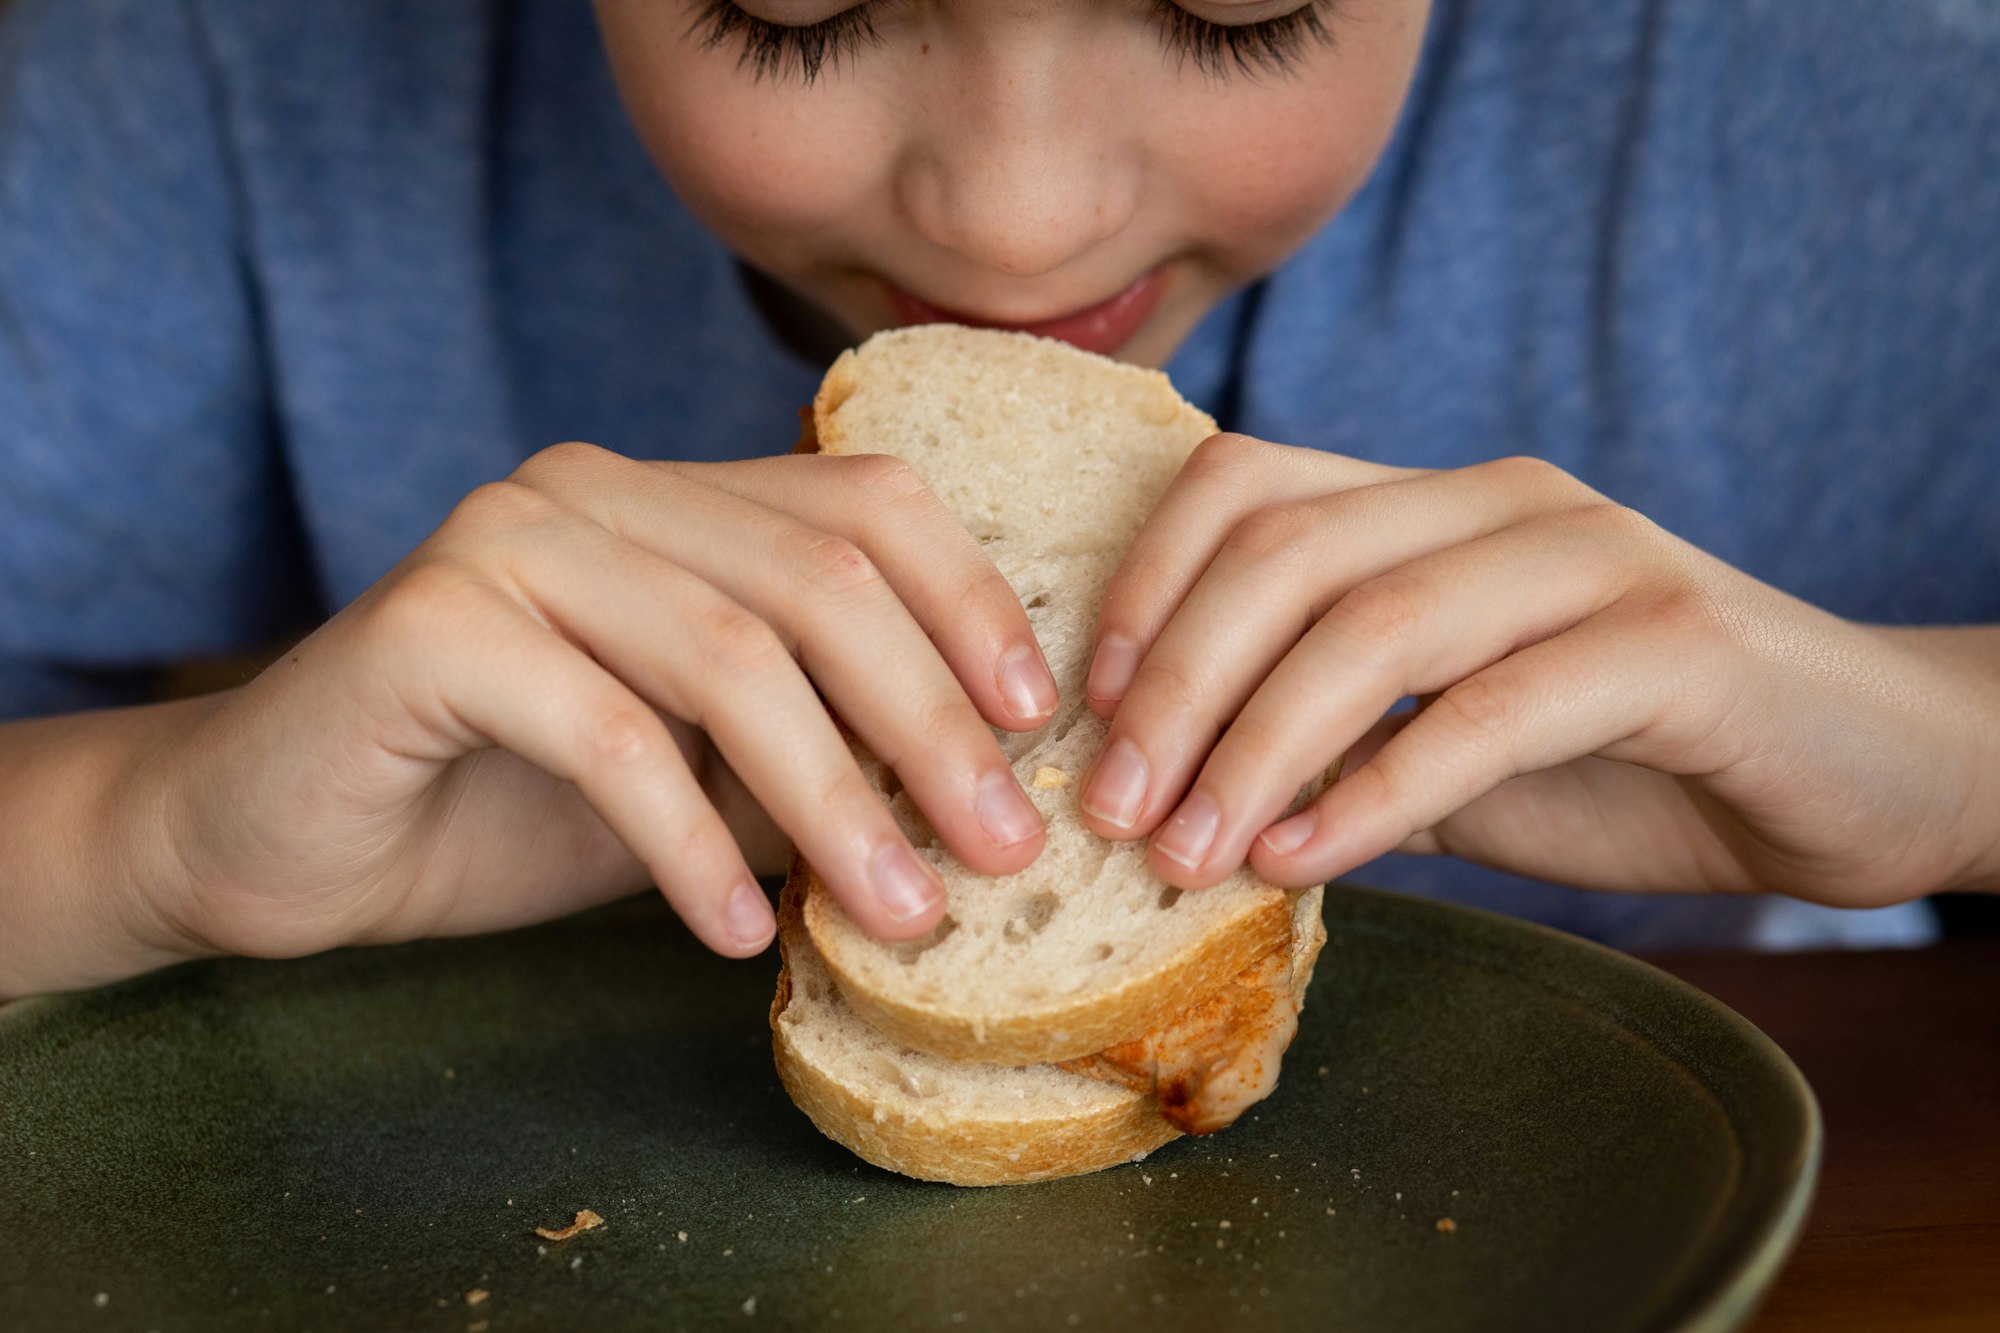 A close-up of a young boy leaning in to take a bite of a bifana sandwich; marinated pork between two slices of bread.